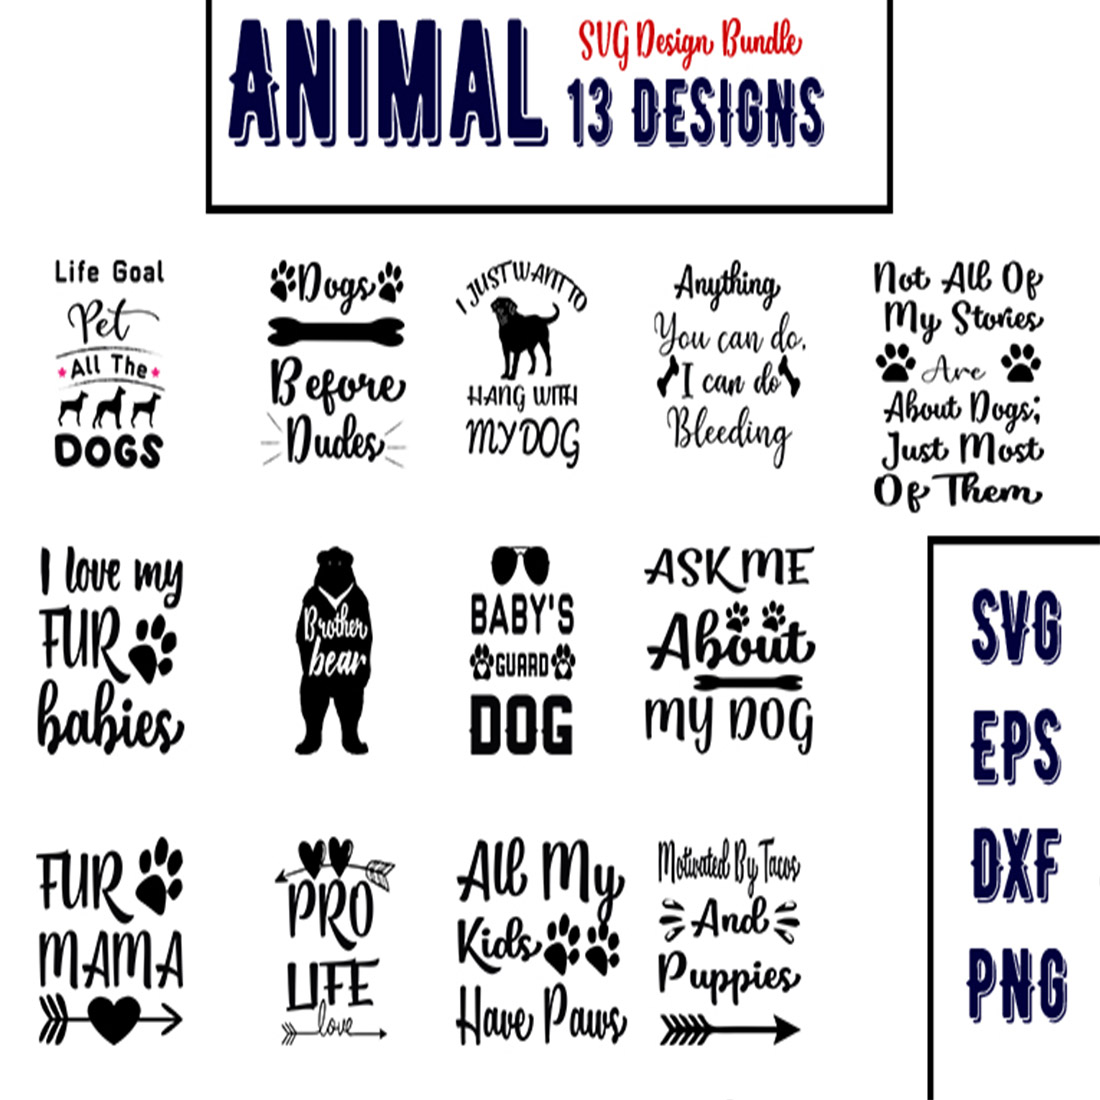 Animal Quotes Bundle cover image.